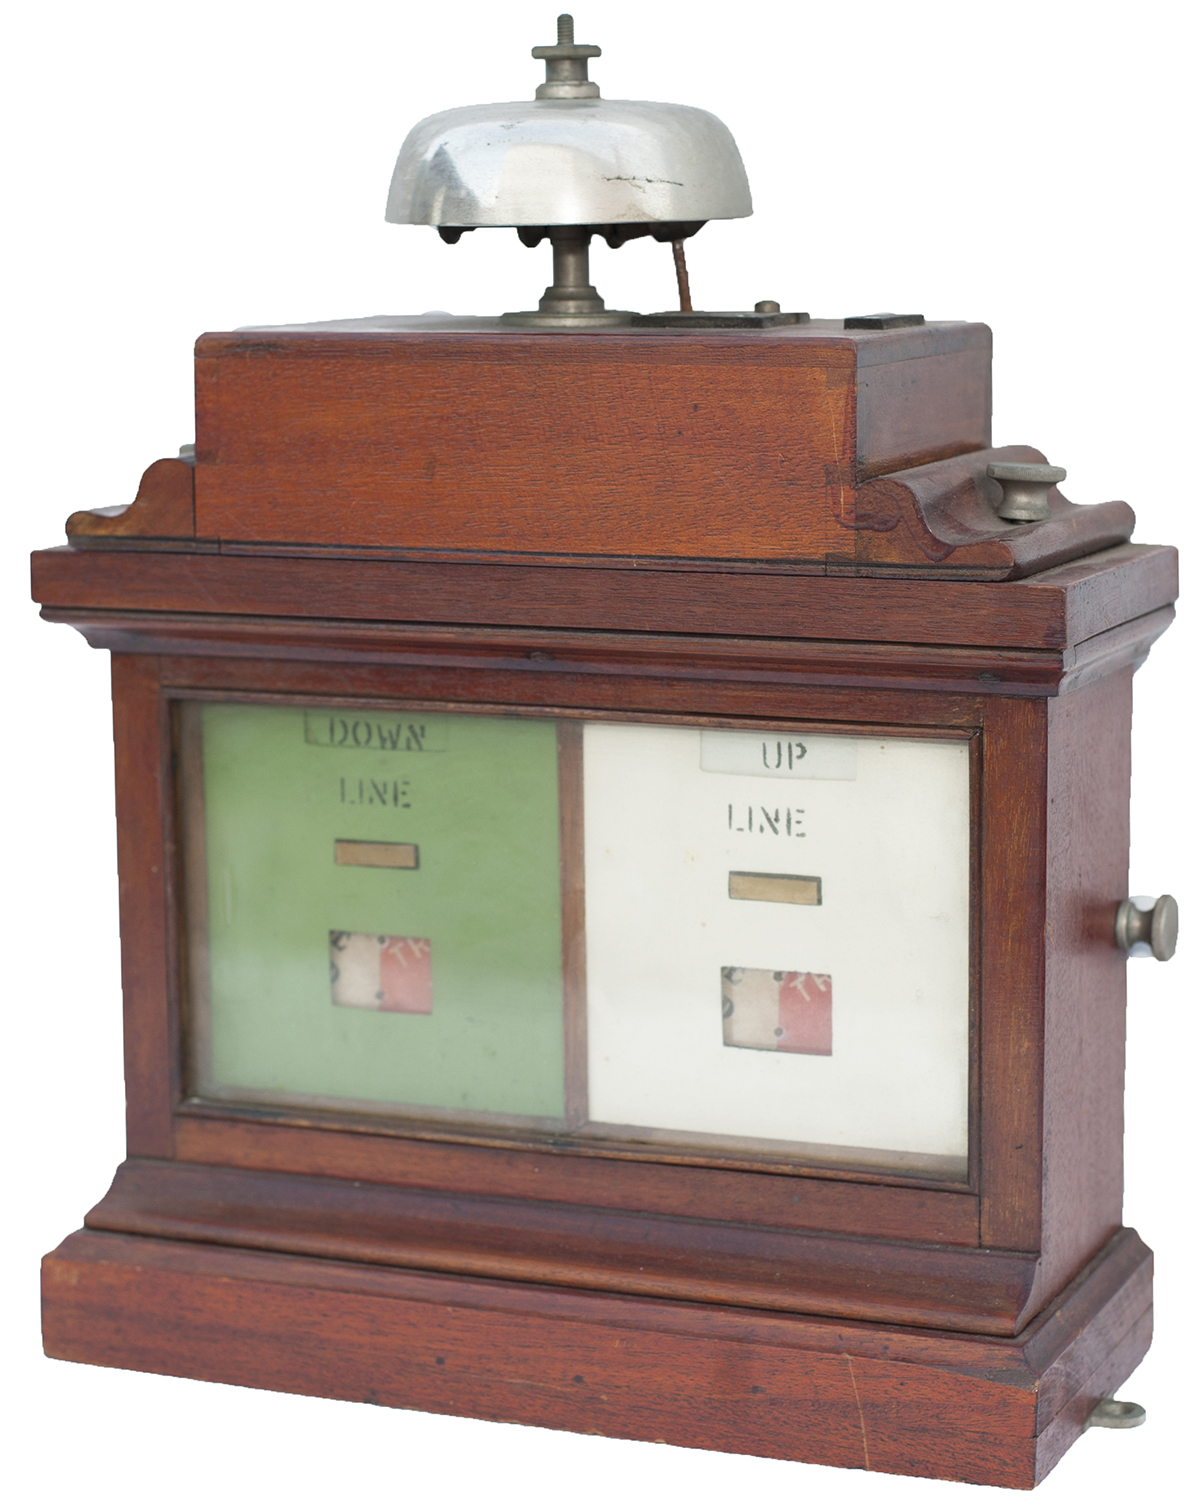 GWR double line crossing keepers mahogany cased instrument complete with bell mounted on the top,